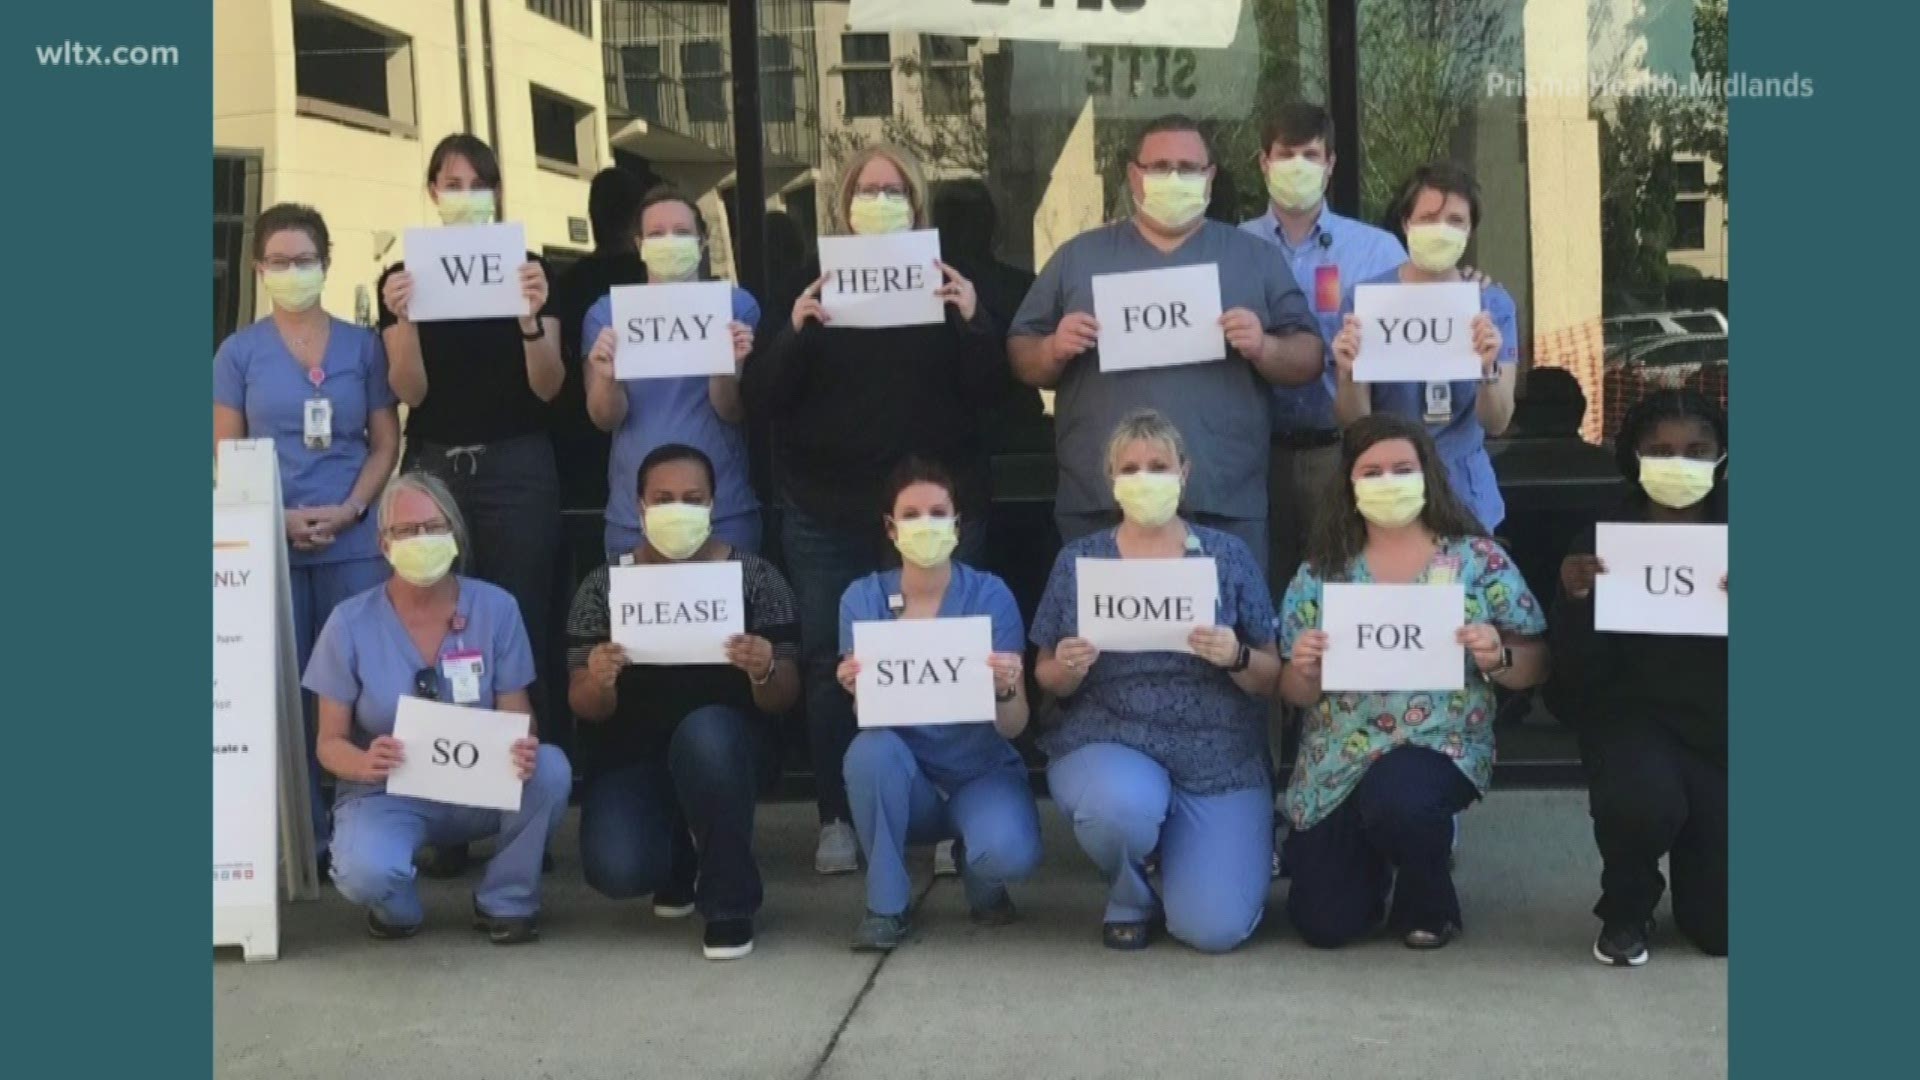 The photo shows health care workers with signs that say 'I came to work so you could stay home'